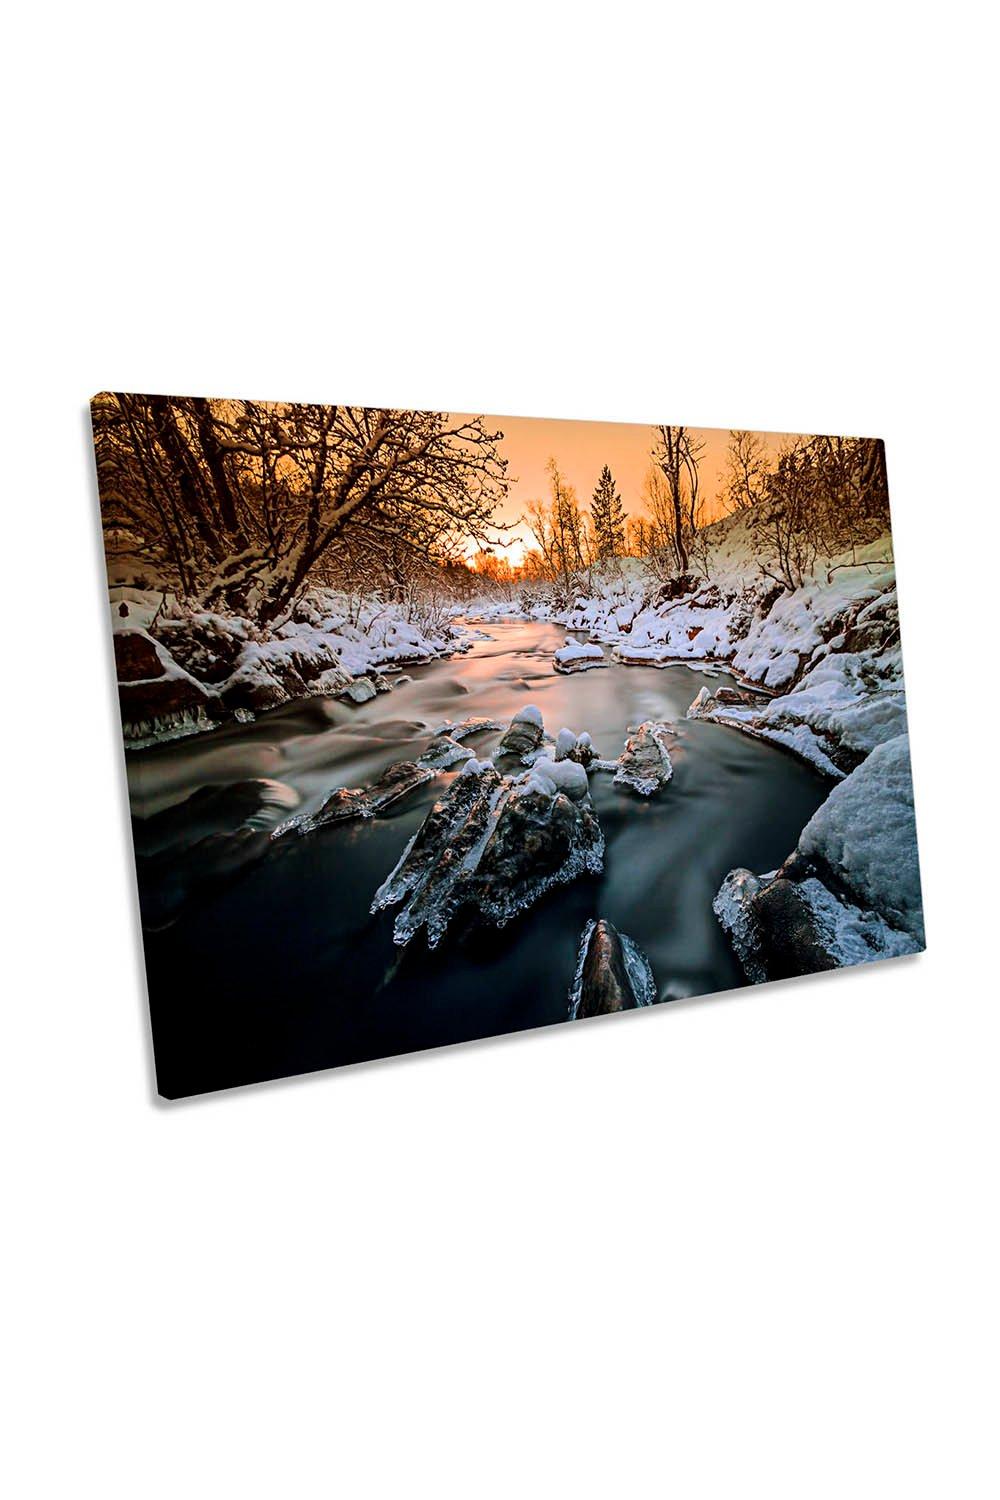 The Sunset River Frosty Landscape Canvas Wall Art Picture Print